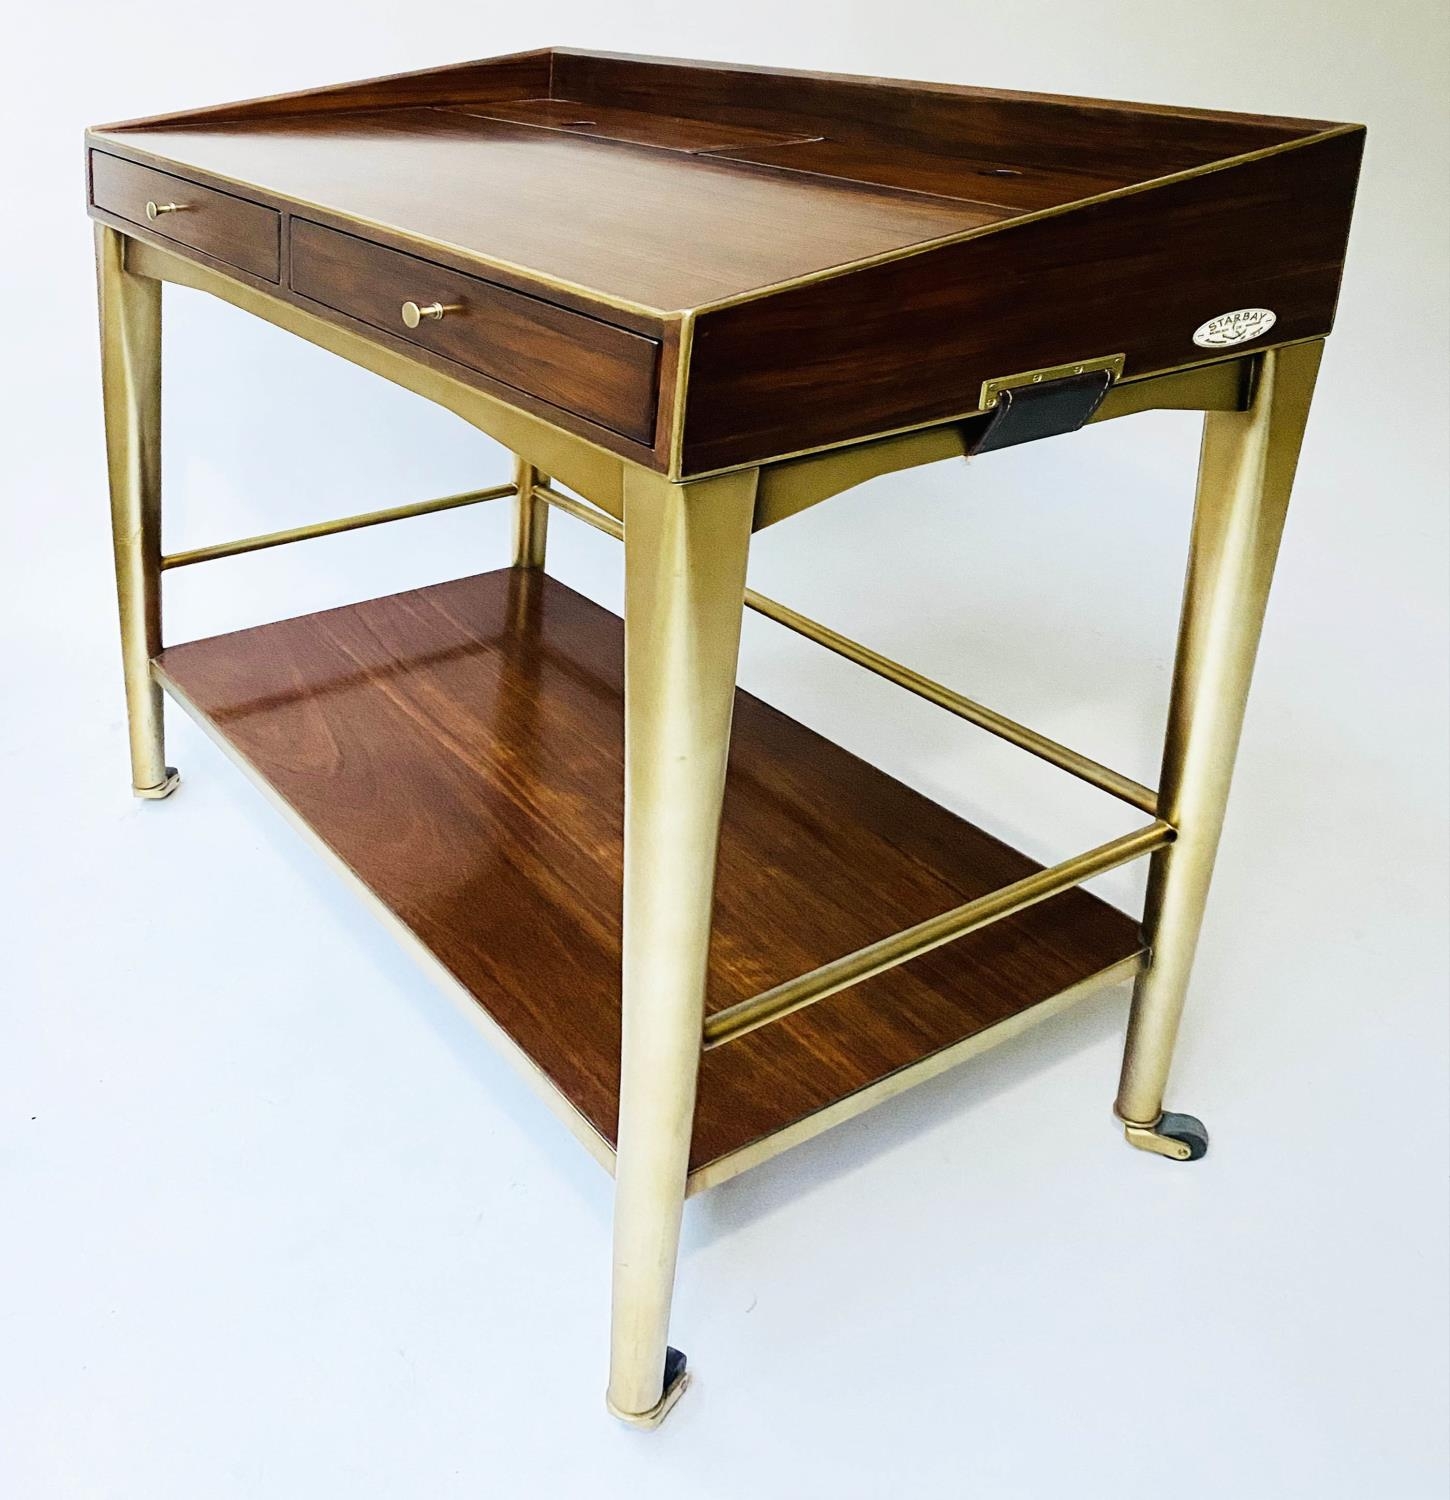 STARBAY WRITING TABLE, 80cm W x 40cm D x 90cm H, American, walnut and brass bound, with two drawers, - Image 5 of 8